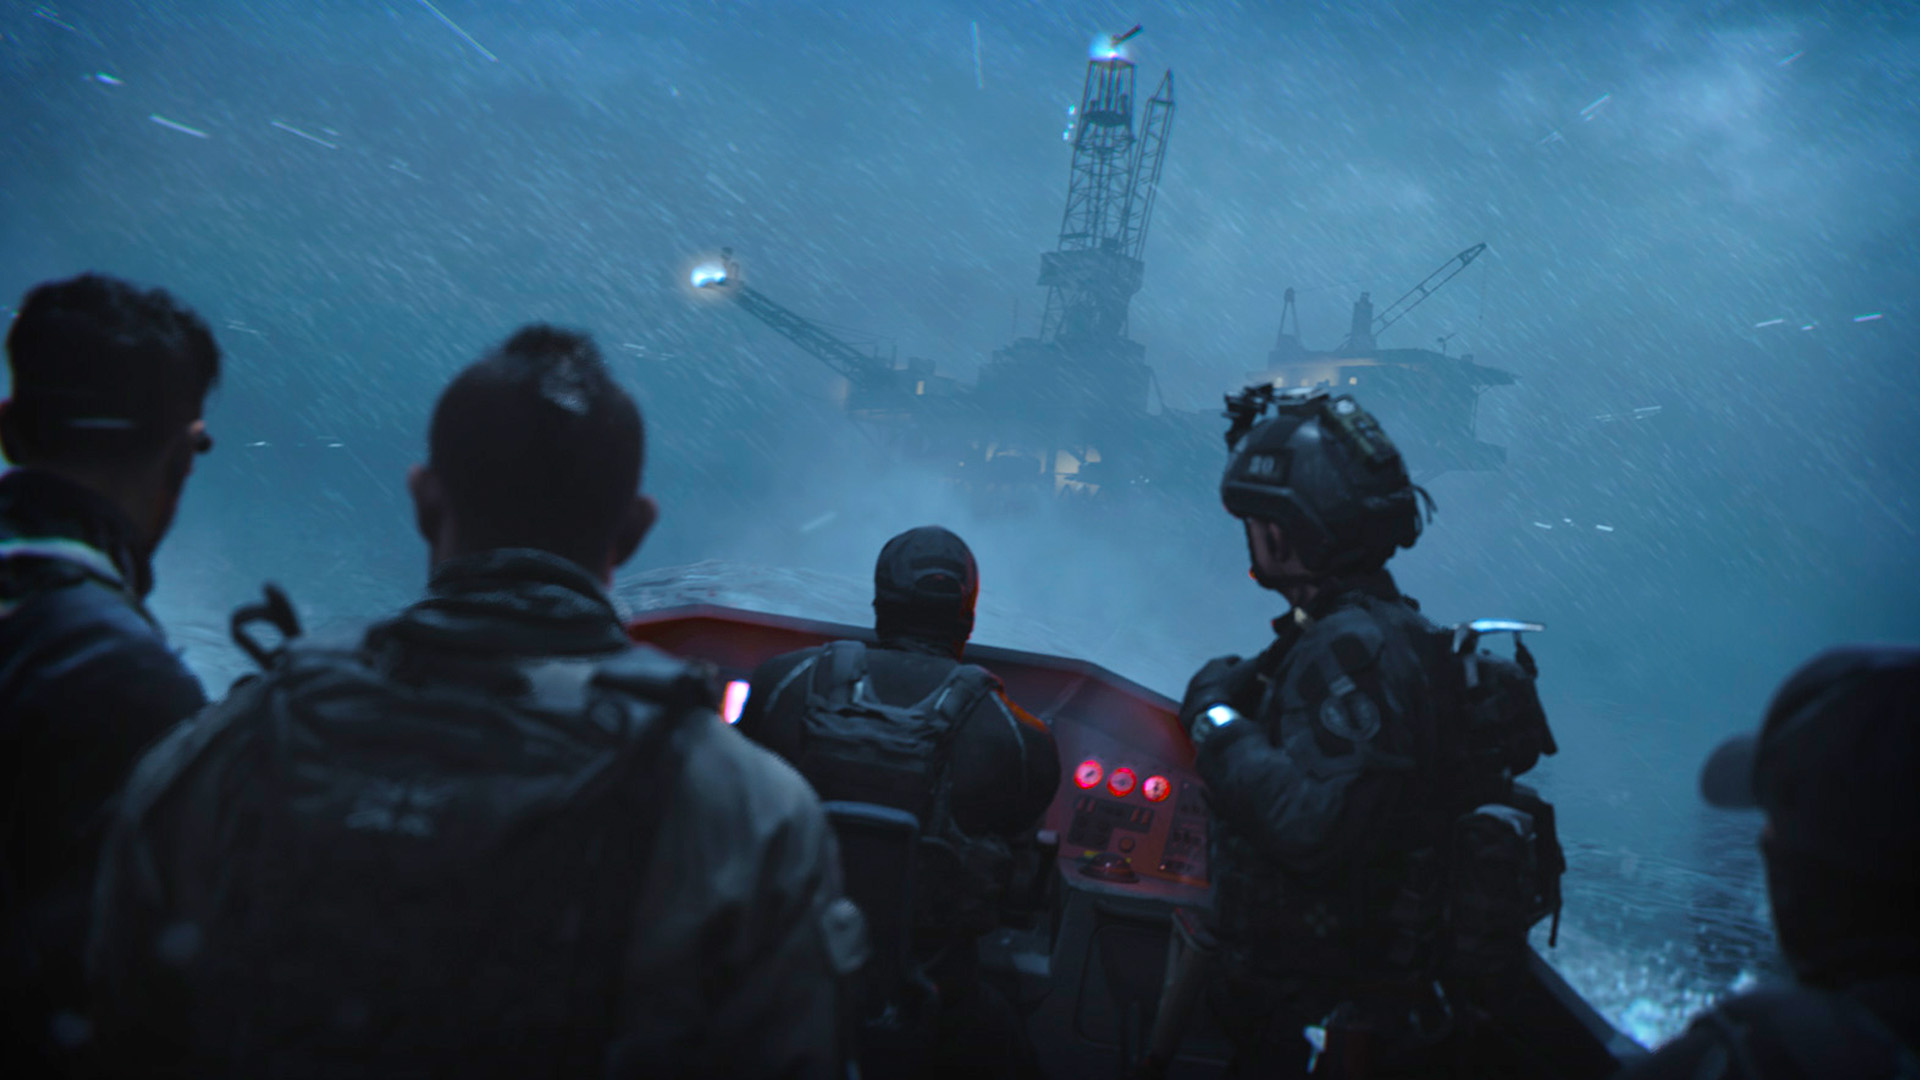 Call of Duty Warzone 2 release date: five soldiers ride to the ship in a small boat at night